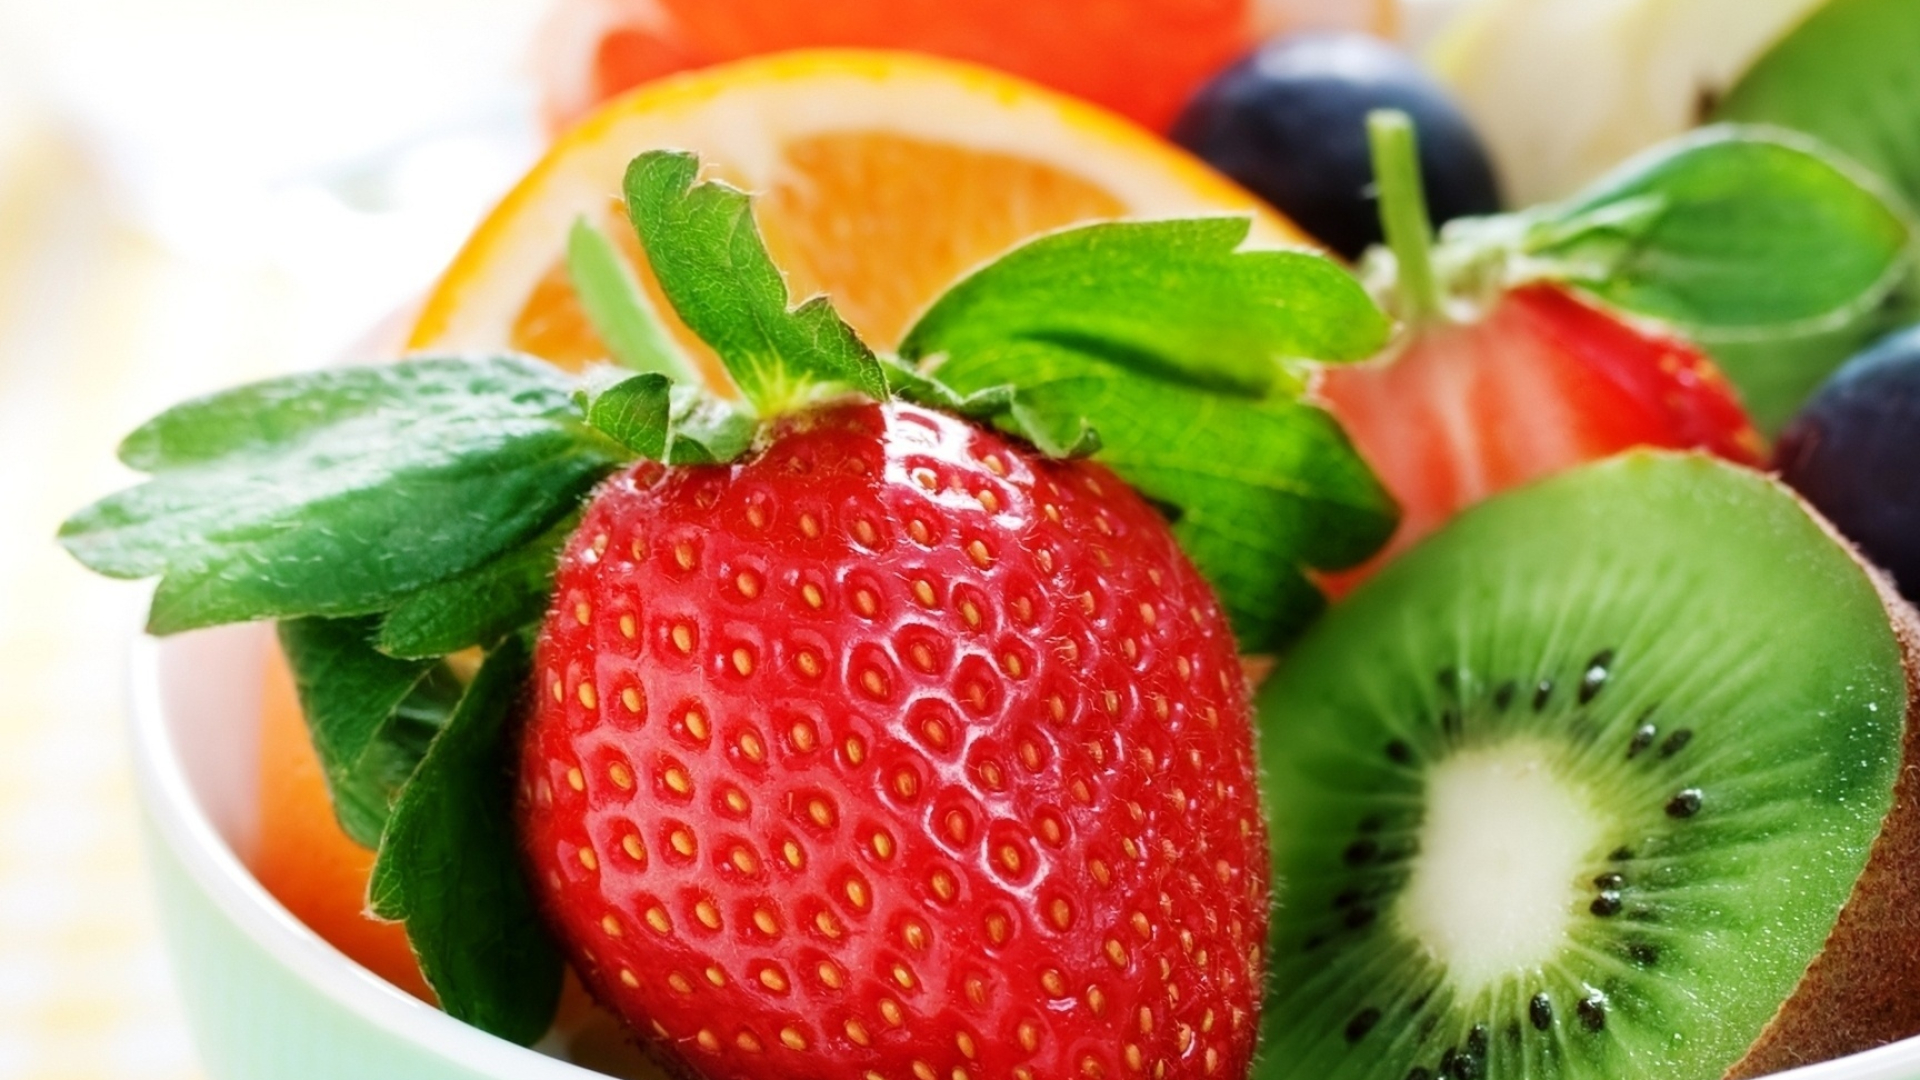 Kiwi, orange, and strawberries, Full HD wallpapers, Fruity fusion, Vibrant and lively, 1920x1080 Full HD Desktop